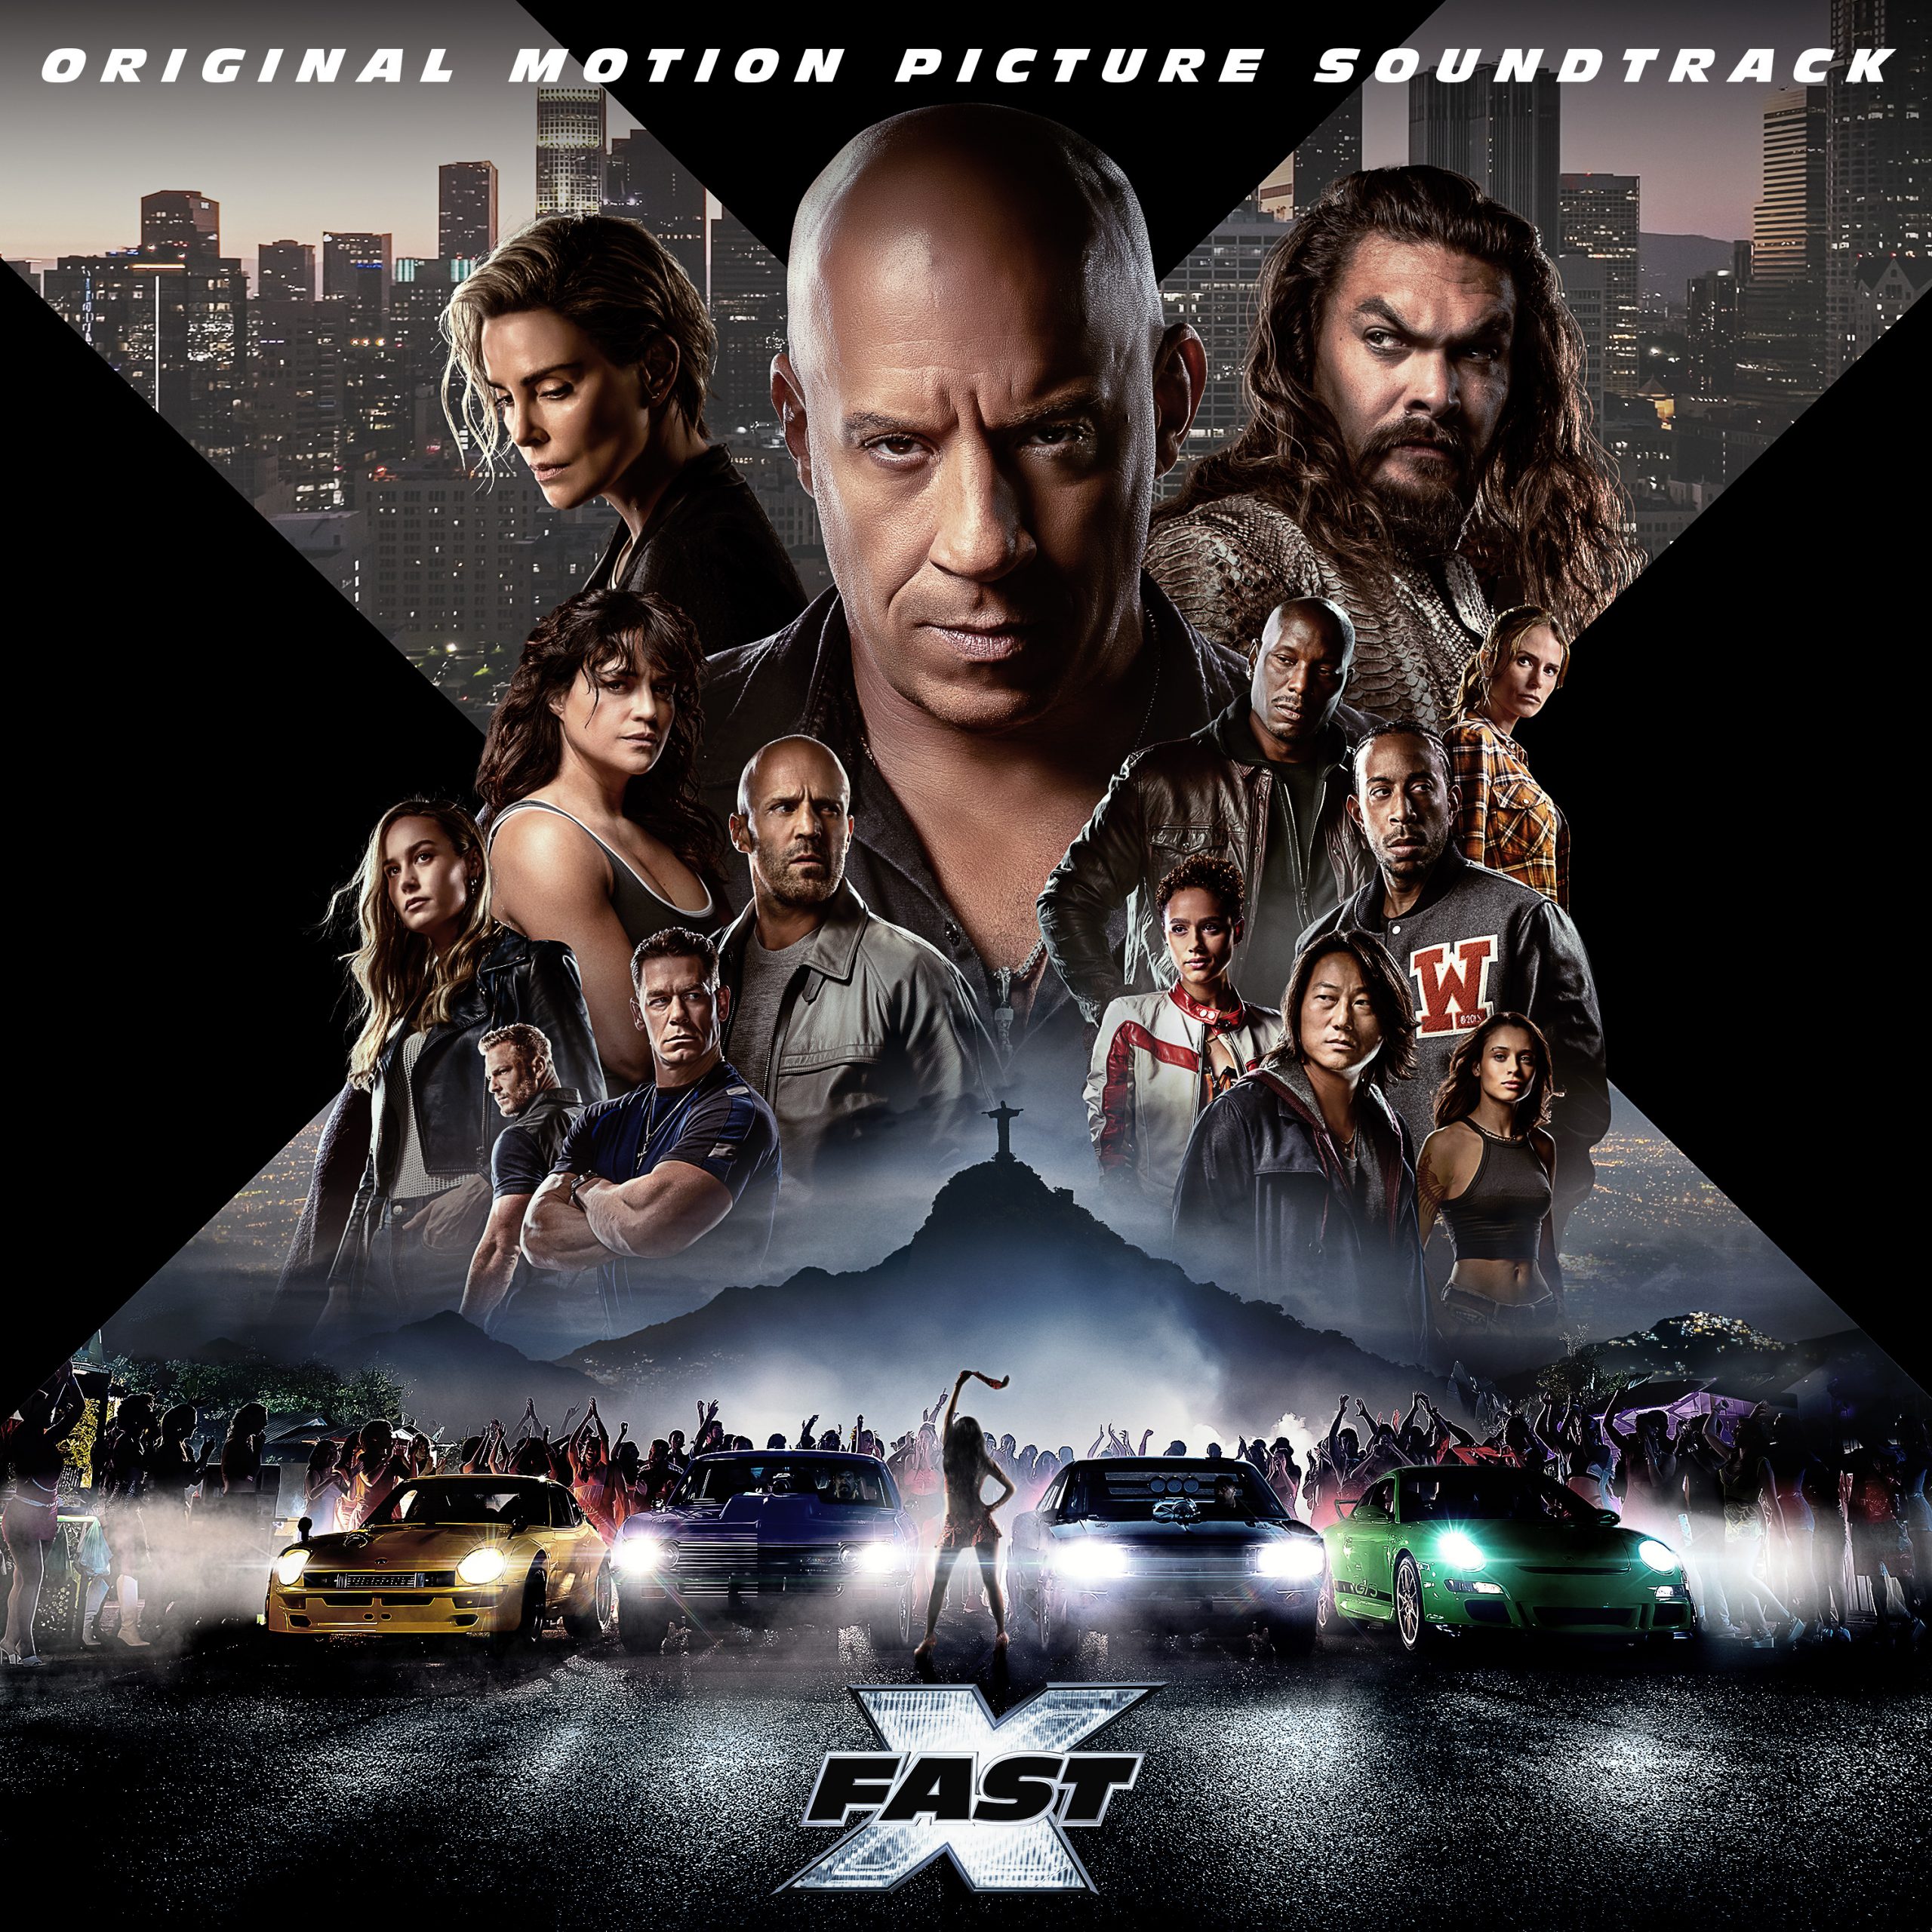 Force Rep Xxx Video - ARTIST PARTNER GROUP AND UNIVERSAL PICTURES, IN PARTNERSHIP WITH UNIVERSAL  MUSIC GROUP, UNVEIL TRACK LIST FOR FAST X: ORIGINAL MOTION PICTURE  SOUNDTRACK - UMG